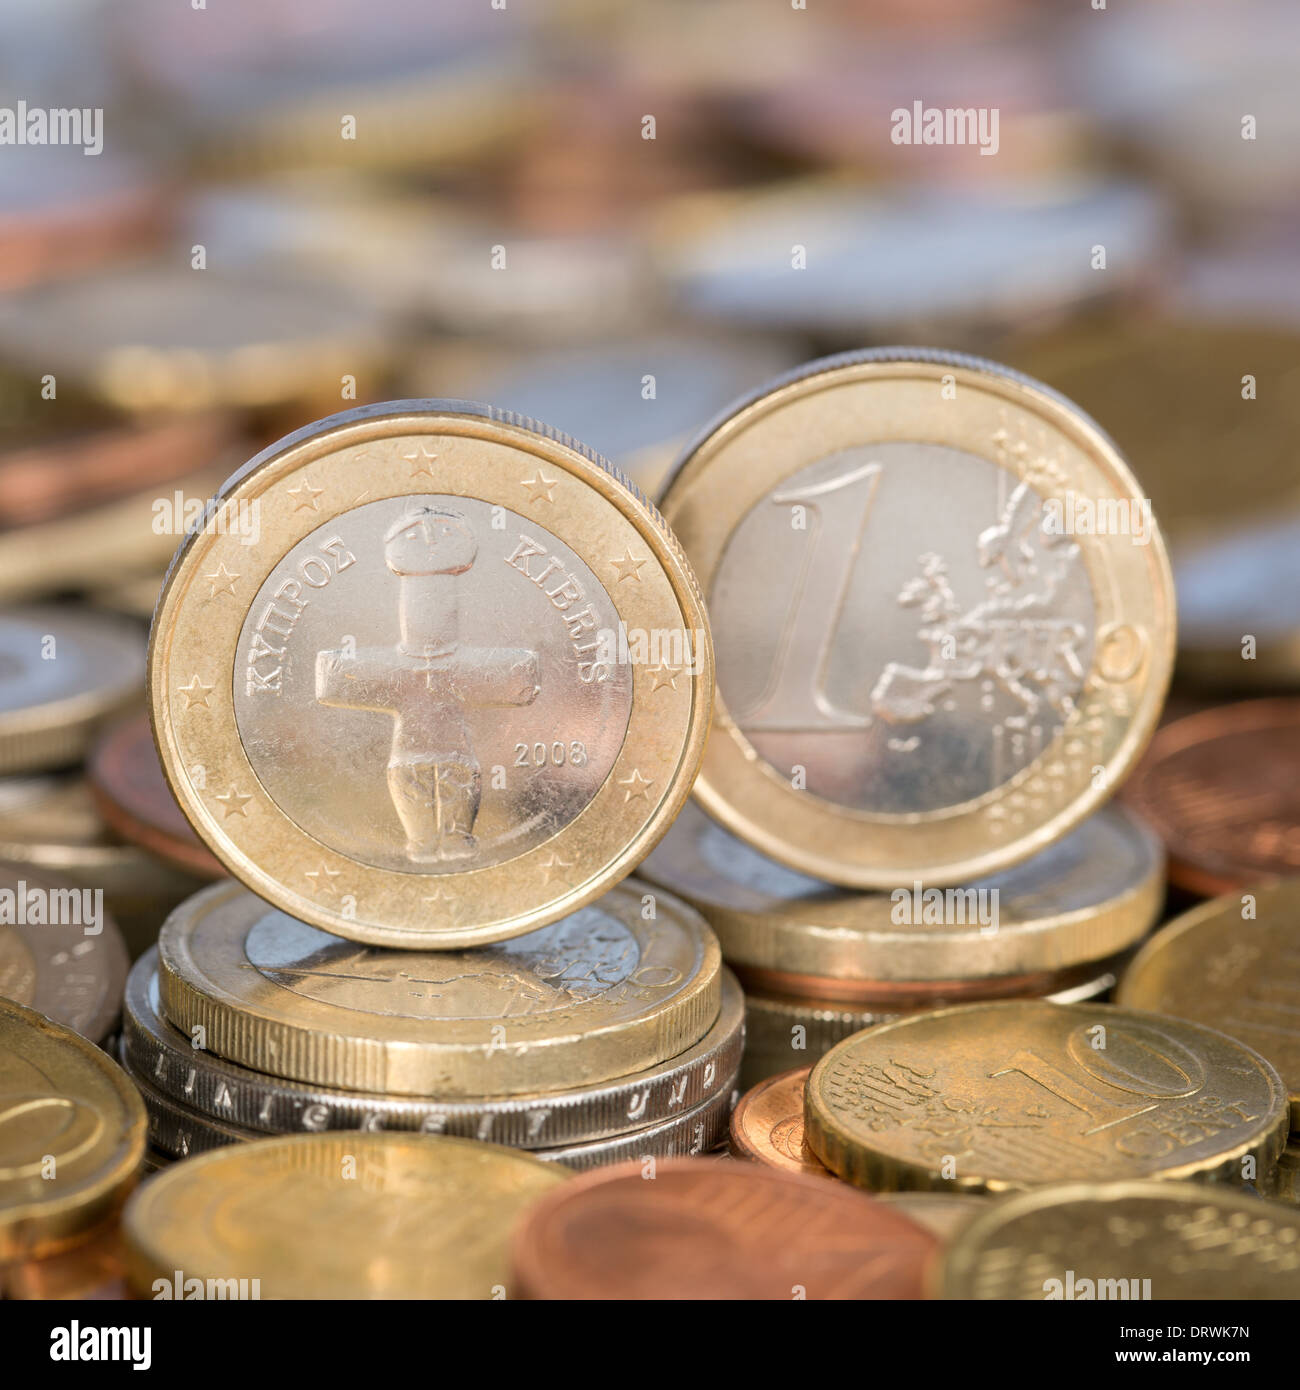 A one Euro coin from the European Union currency member country Cyprus Stock Photo